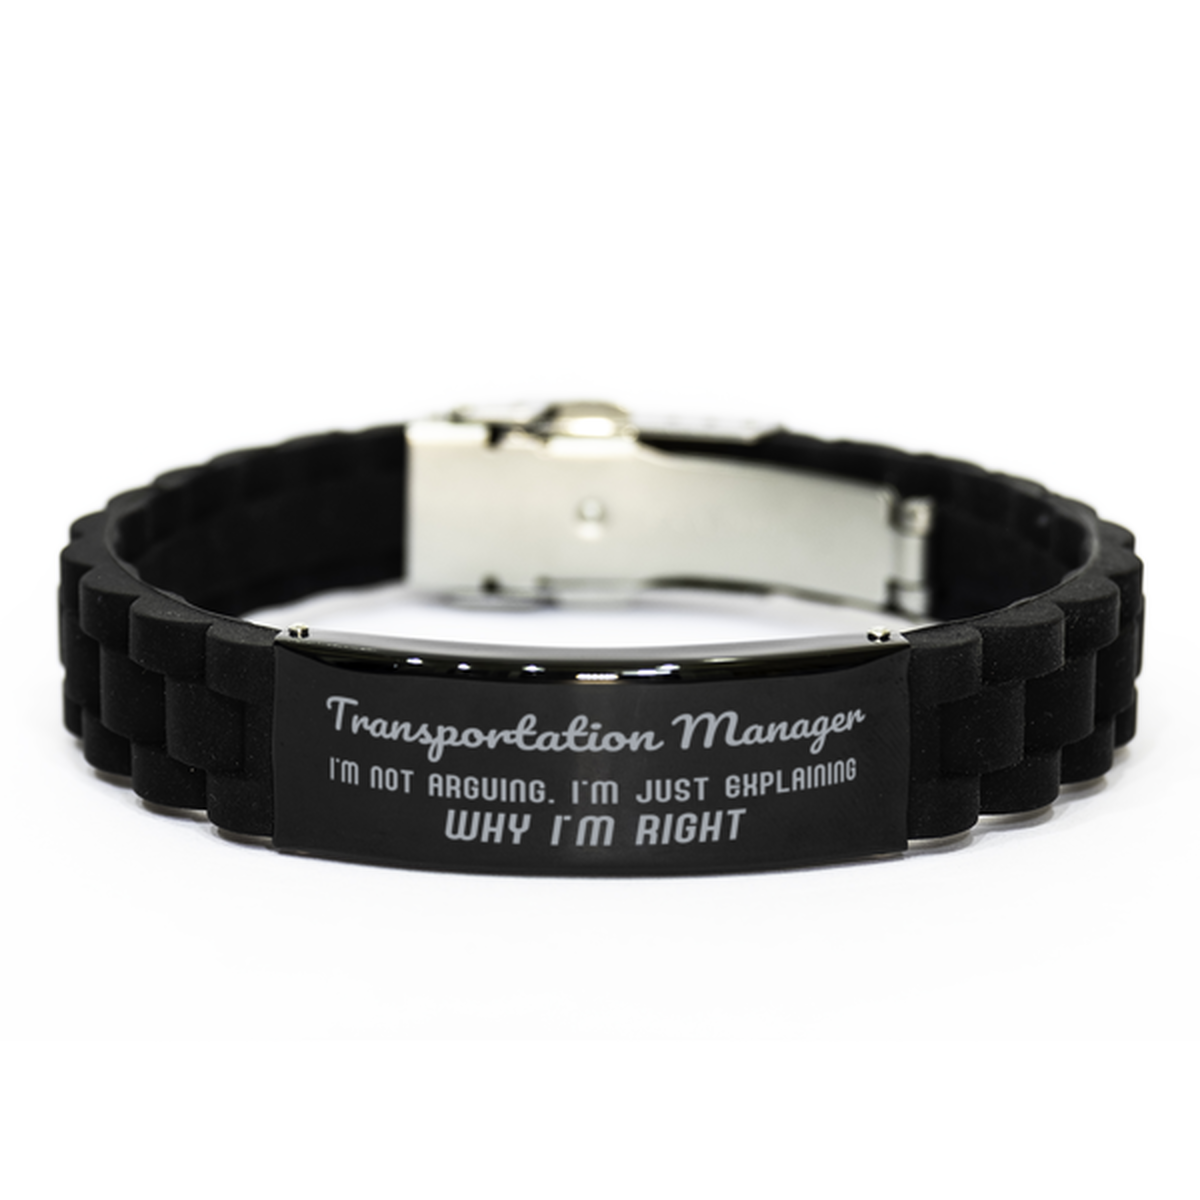 Transportation Manager I'm not Arguing. I'm Just Explaining Why I'm RIGHT Black Glidelock Clasp Bracelet, Funny Saying Quote Transportation Manager Gifts For Transportation Manager Graduation Birthday Christmas Gifts for Men Women Coworker